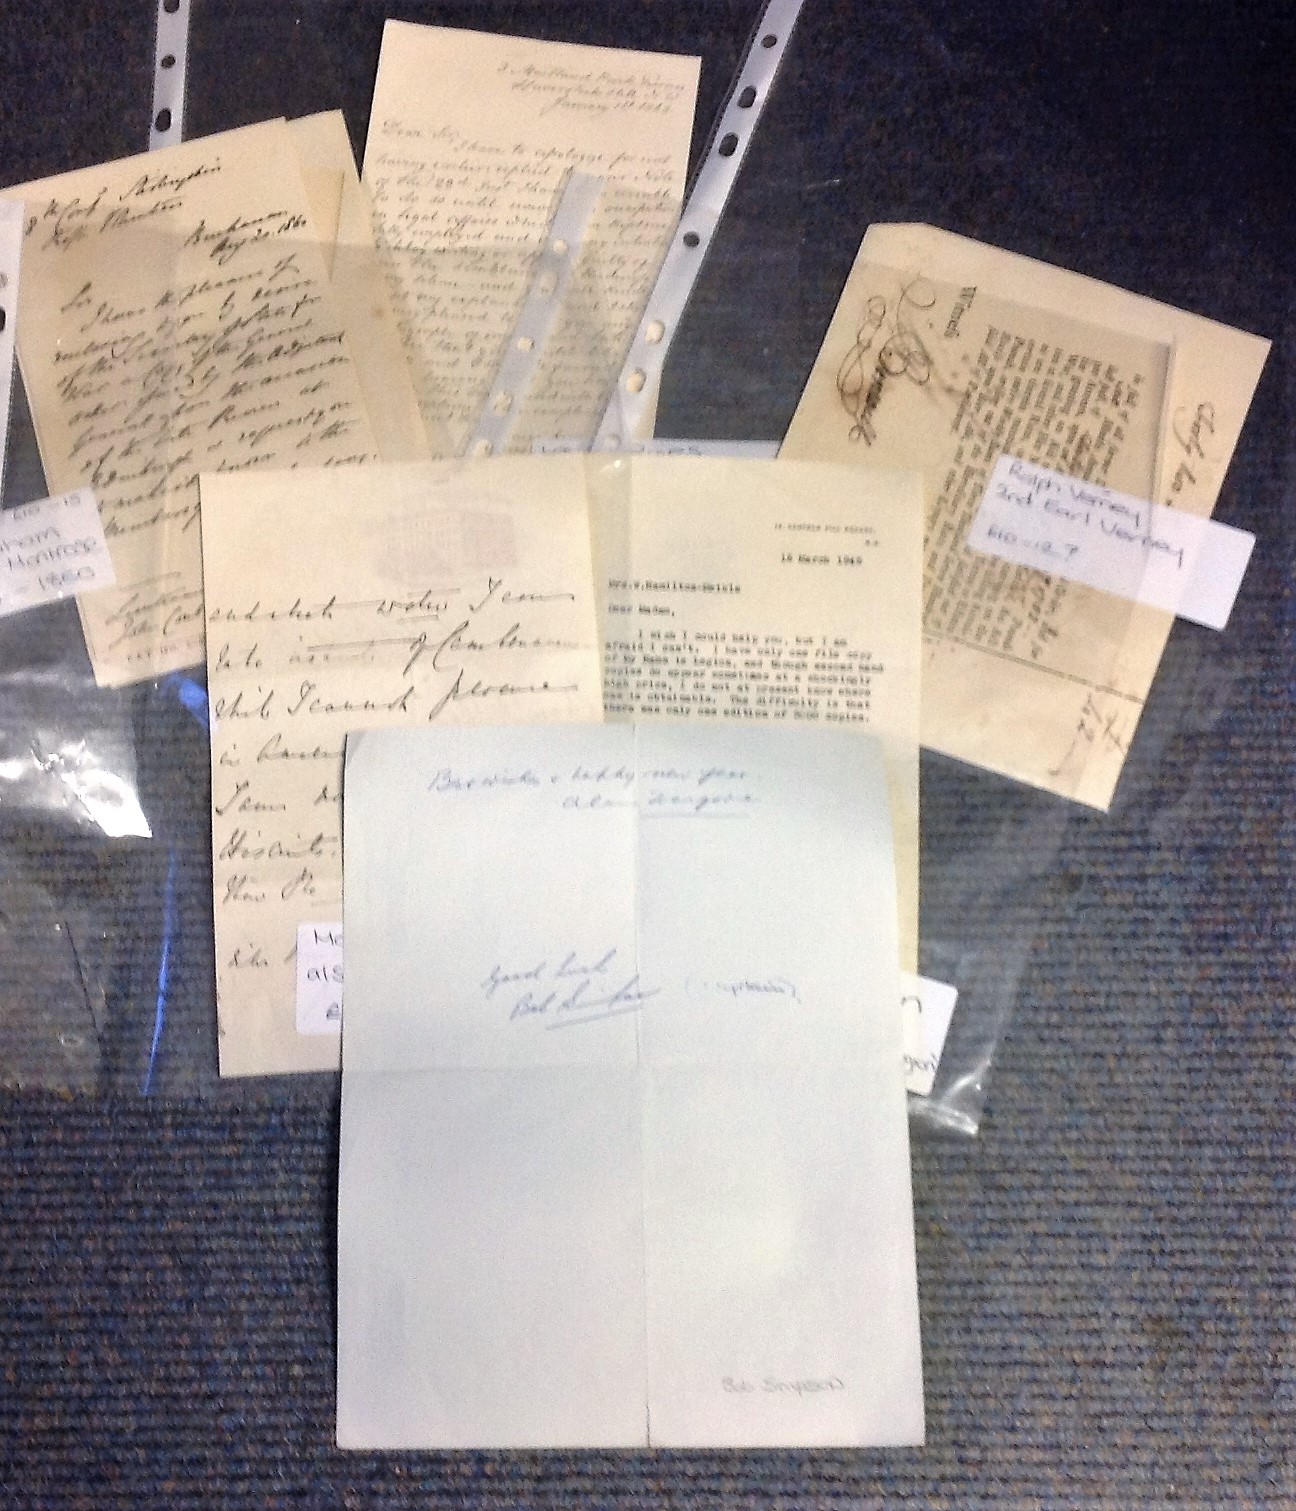 Historical letter collection includes 8 ALS some interesting names such as Madge Kendall, James